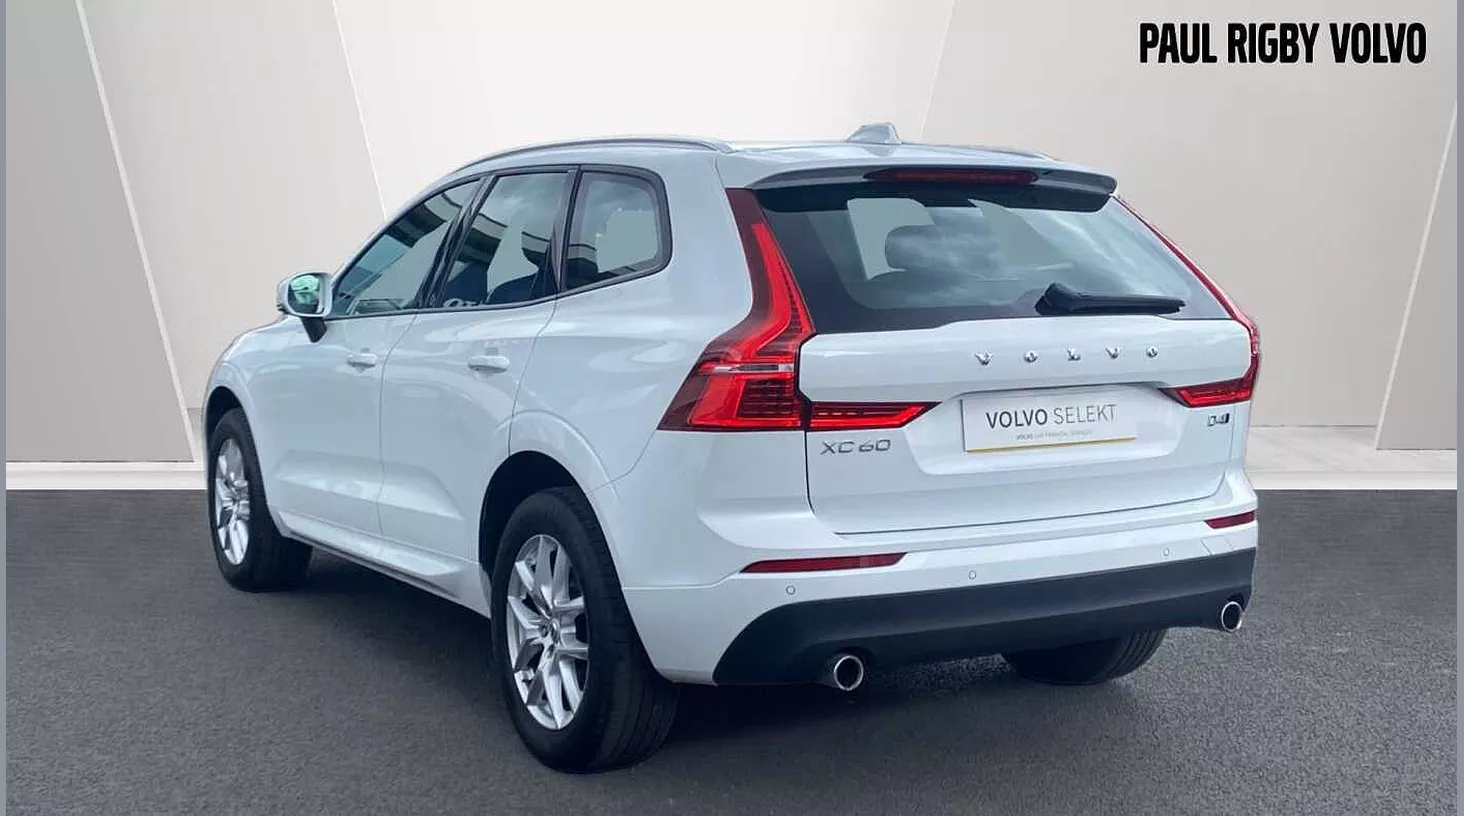 Volvo XC60 2.0 D4 Momentum Pro 5dr AWD Geartronic